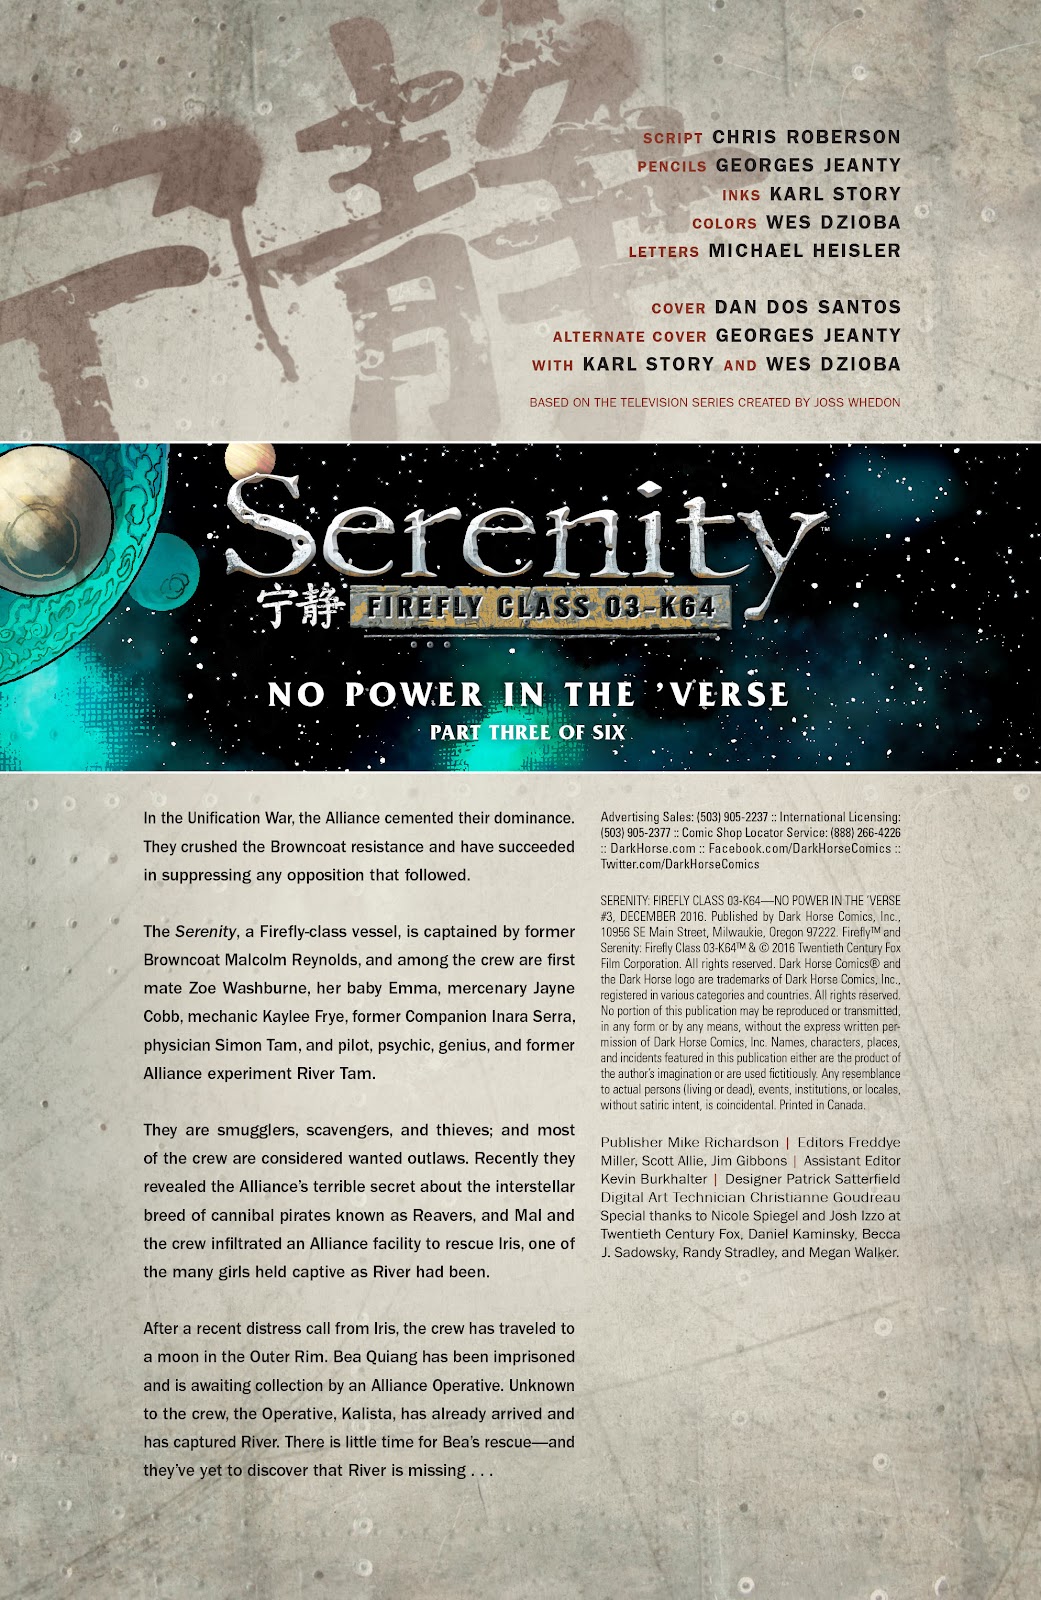 Serenity: Firefly Class 03-K64 – No Power in the 'Verse issue 3 - Page 3